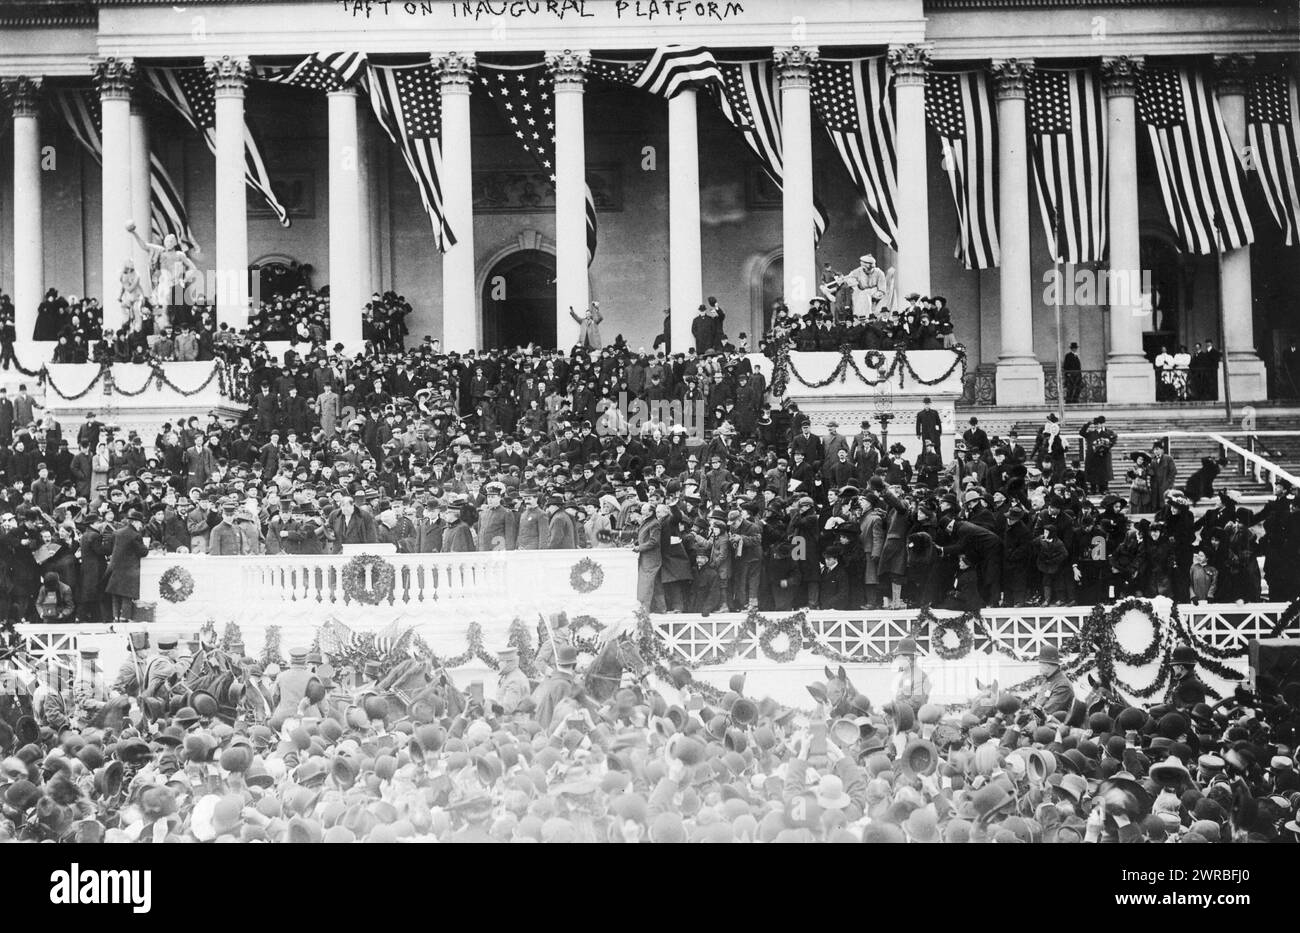 Taft on inaugural platform, after inauguration in Senate chamber, March 4, 1909, 1909, Taft, William H., (William Howard), 1857-1930, Inaugurations, Photographic prints, 1900-1910., Photographic prints, 1900-1910, 1 photographic print Stock Photo